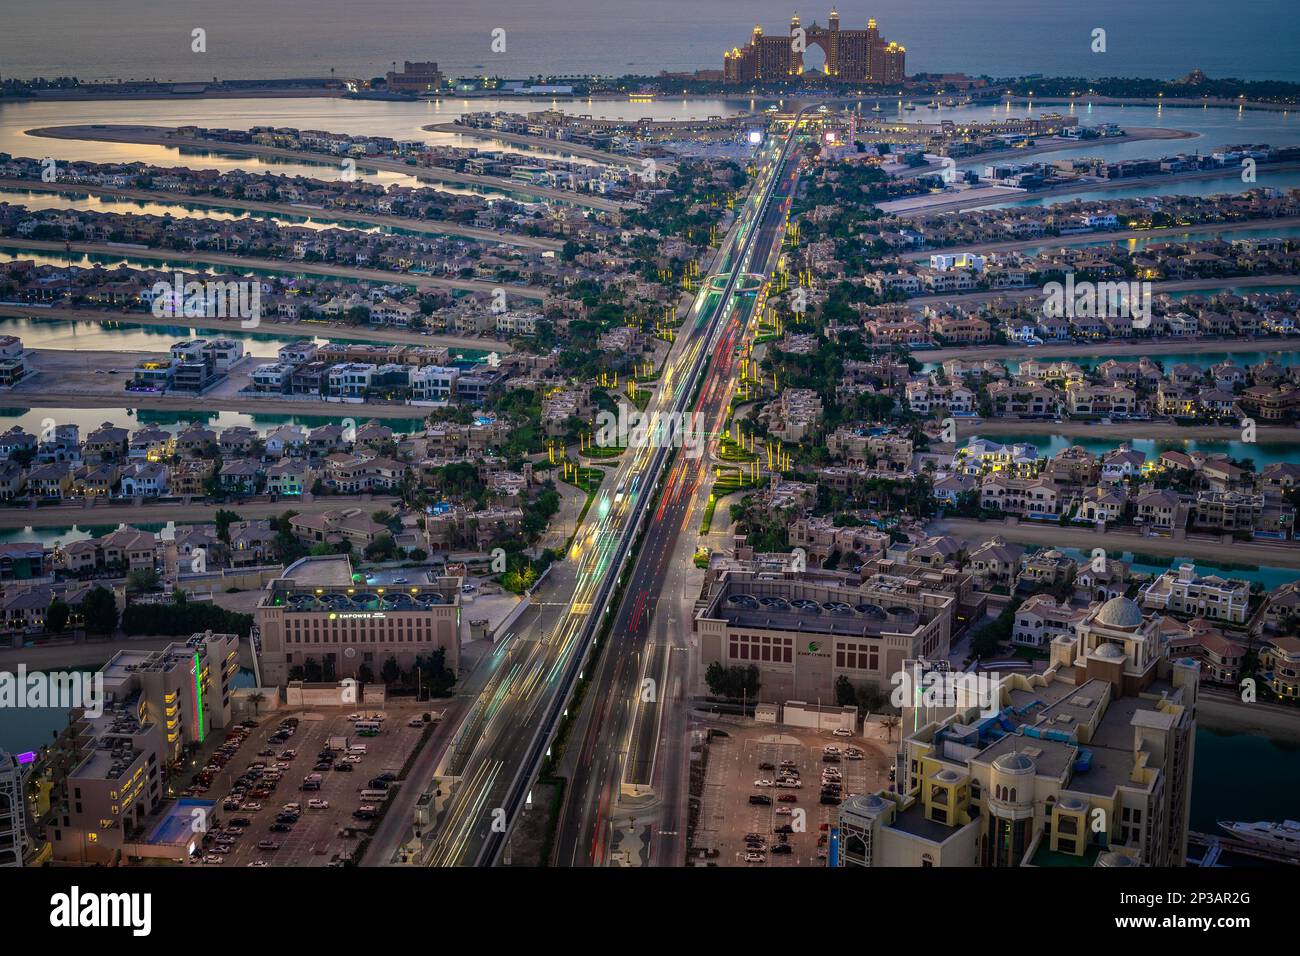 Dubai, UAE -  Dec 05 2021: Aerial view of the Palm Jumeirah in the evening in Dubai, long exposure photo with car light trails Stock Photo